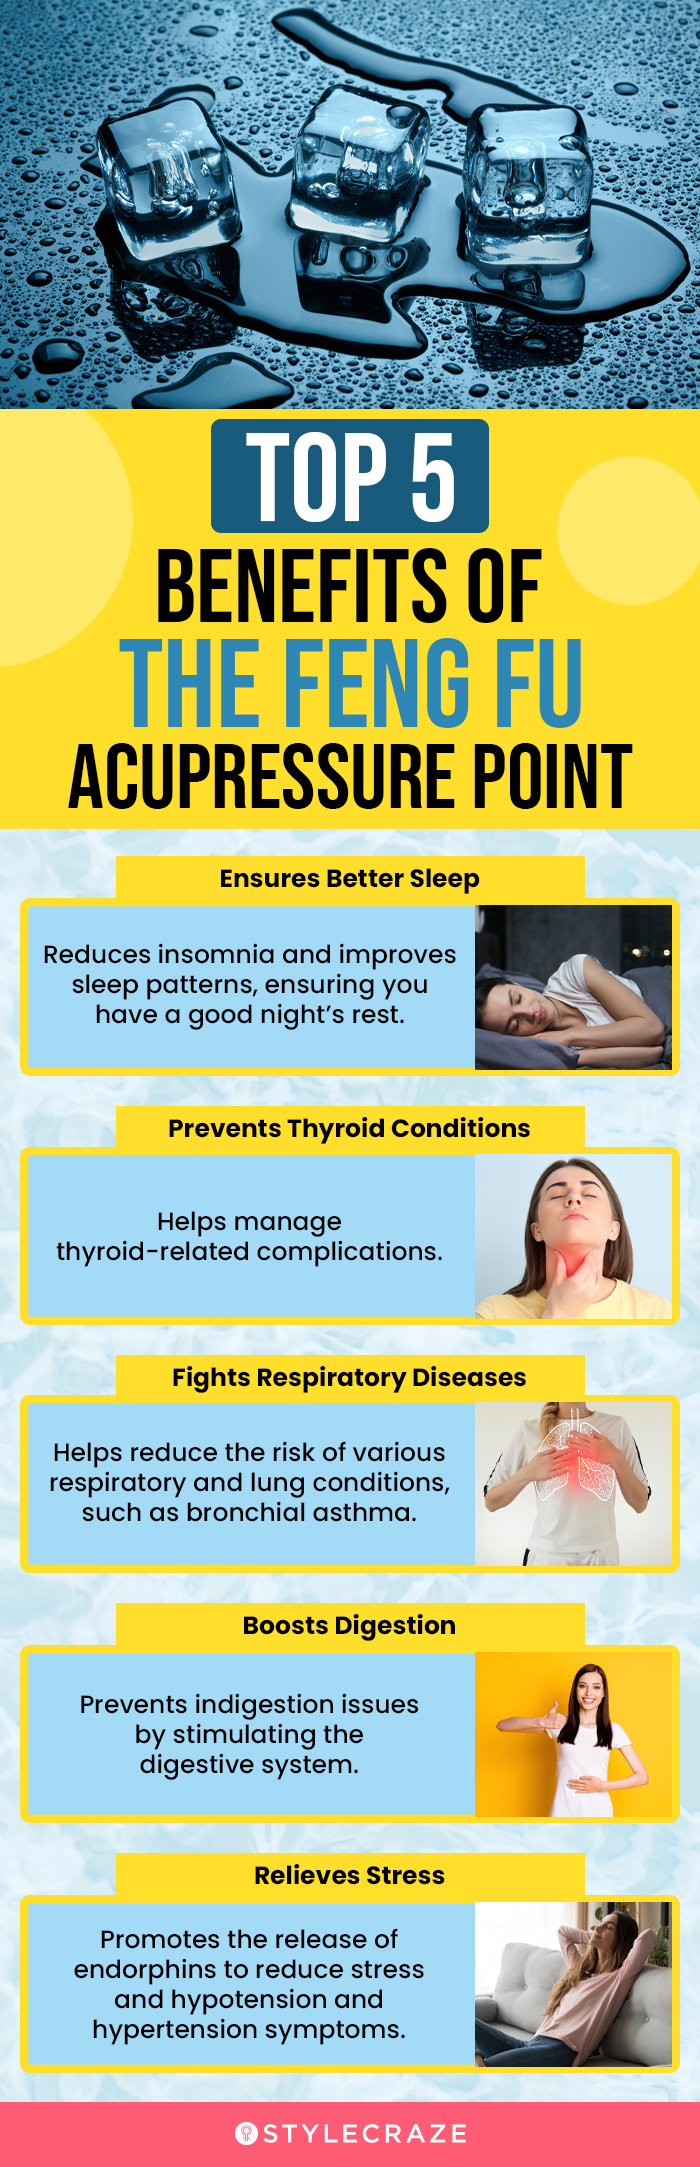 top 5 benefits of the feng fu acupressure point (infographic)